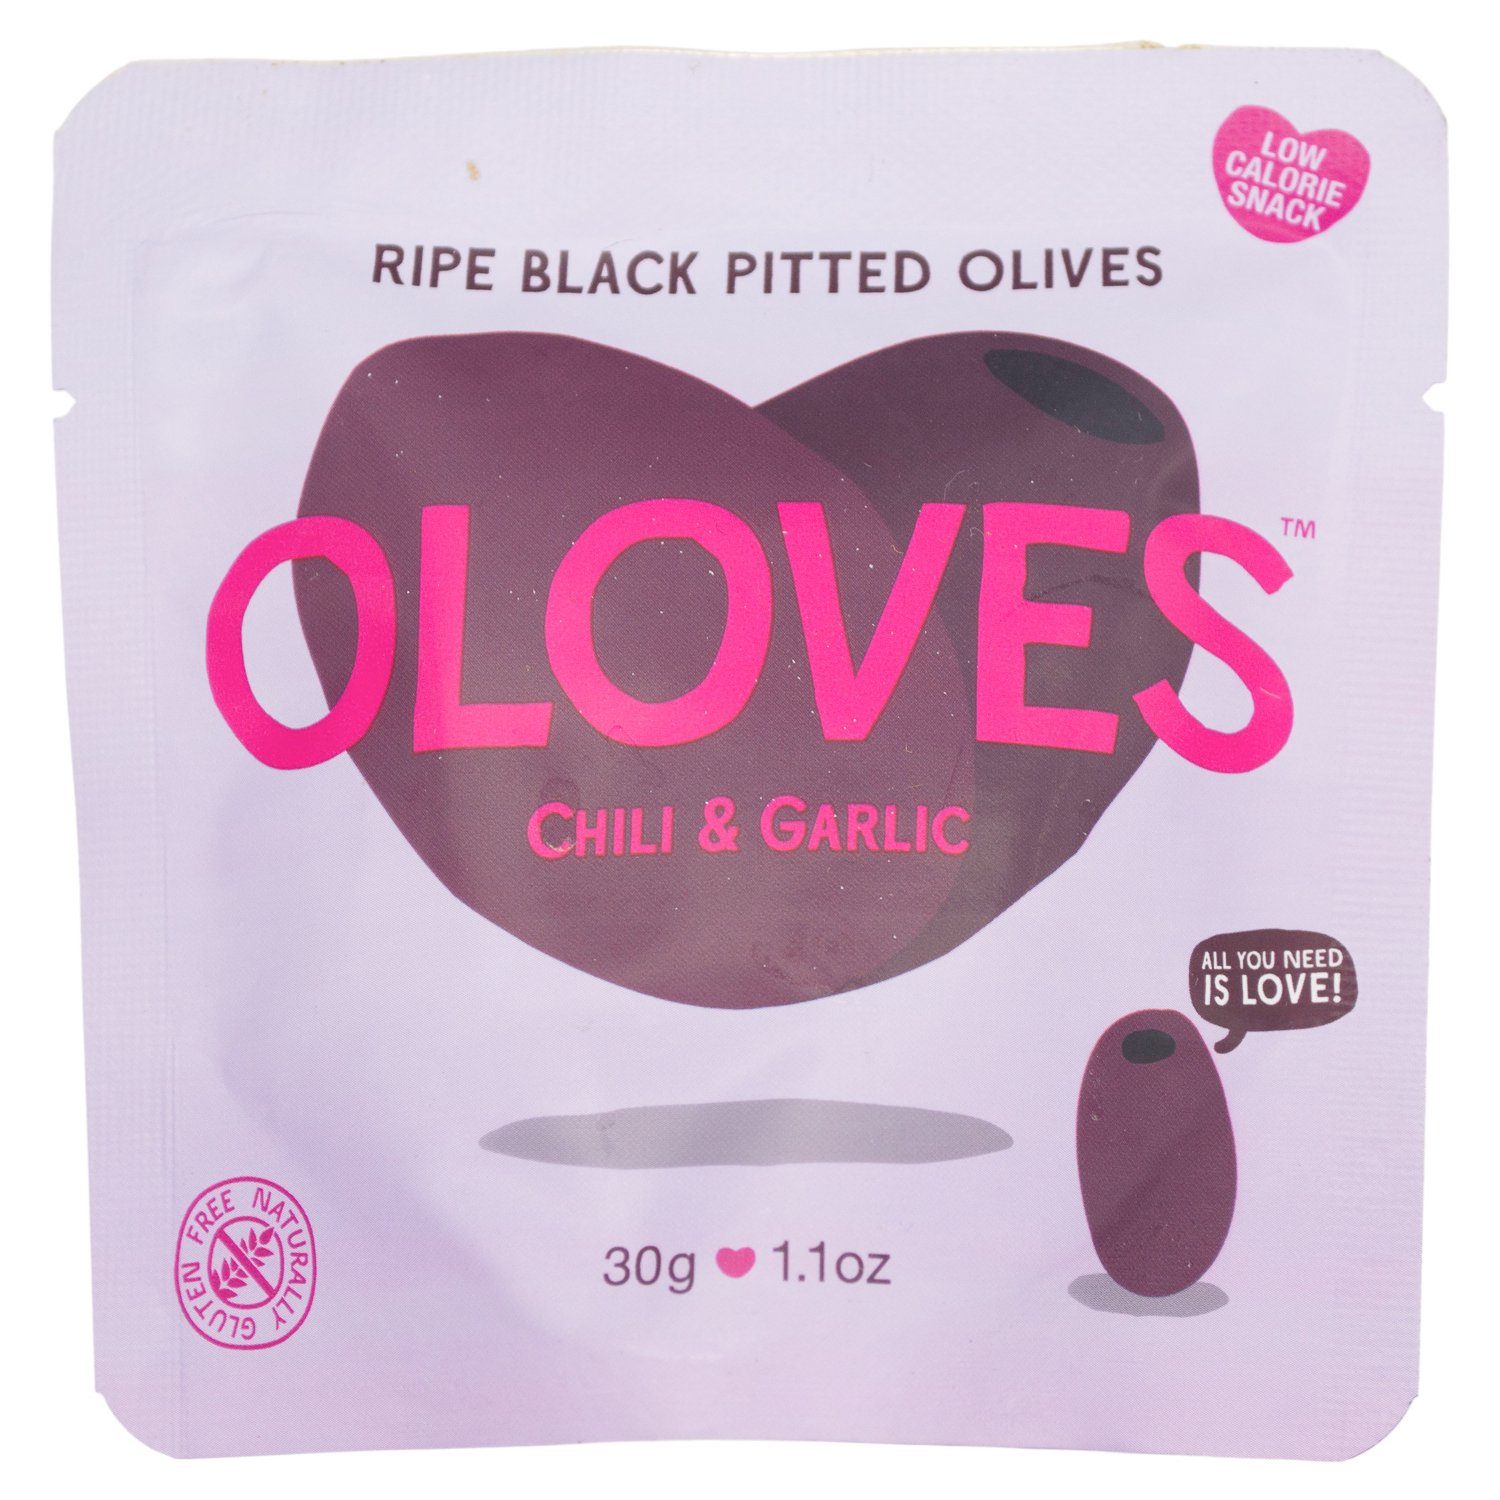 OLOVES Natural Whole Pitted Olives Elma Farms Chili & Garlic 1.1 Ounce 